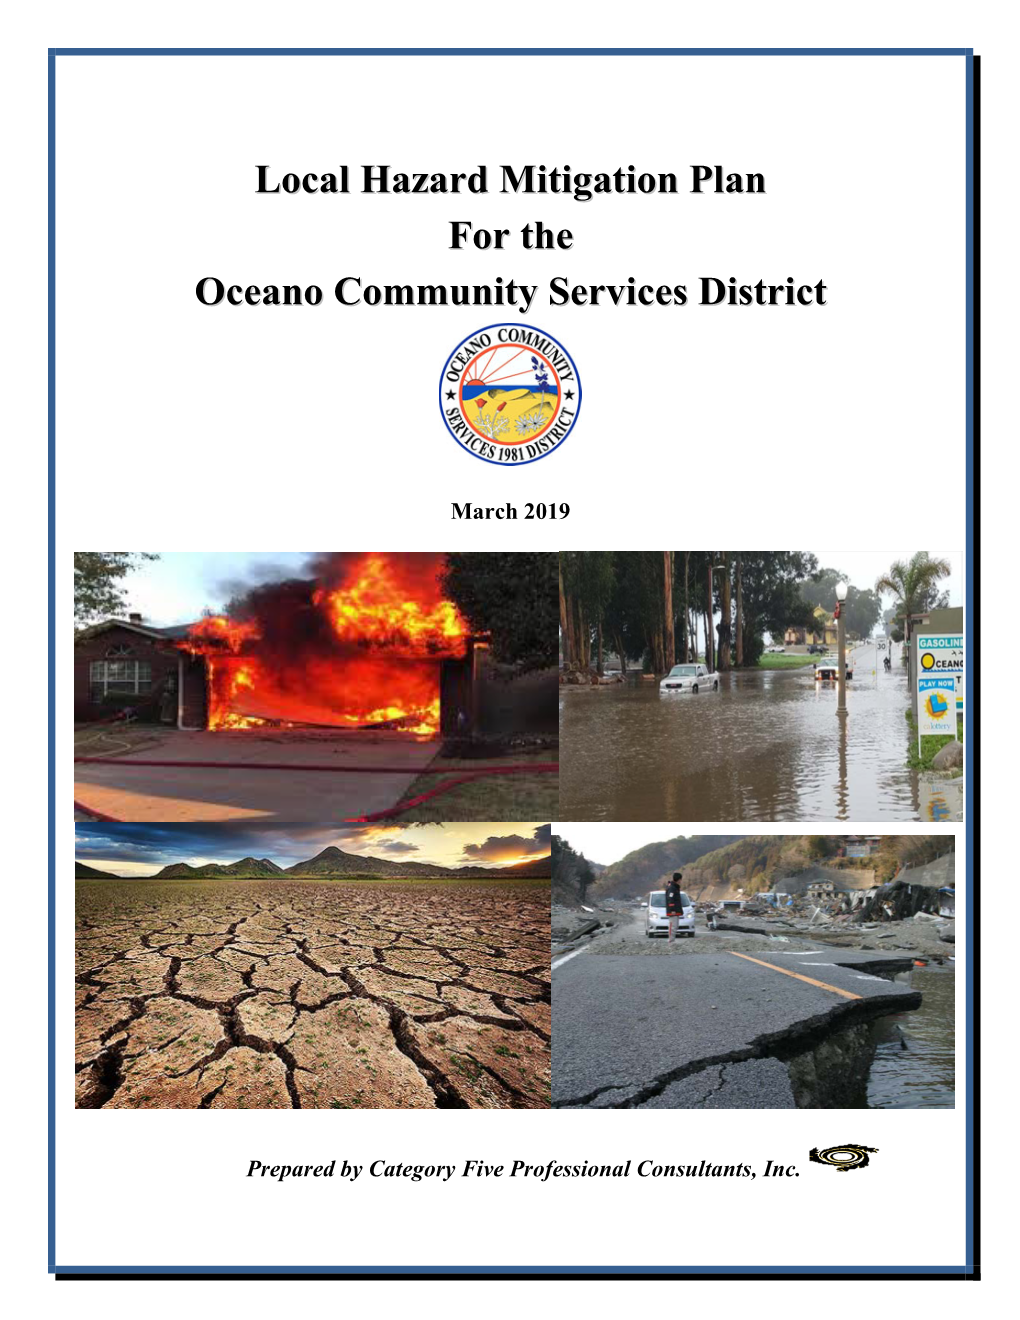 Local Hazard Mitigation Plan for the Oceano Community Services District